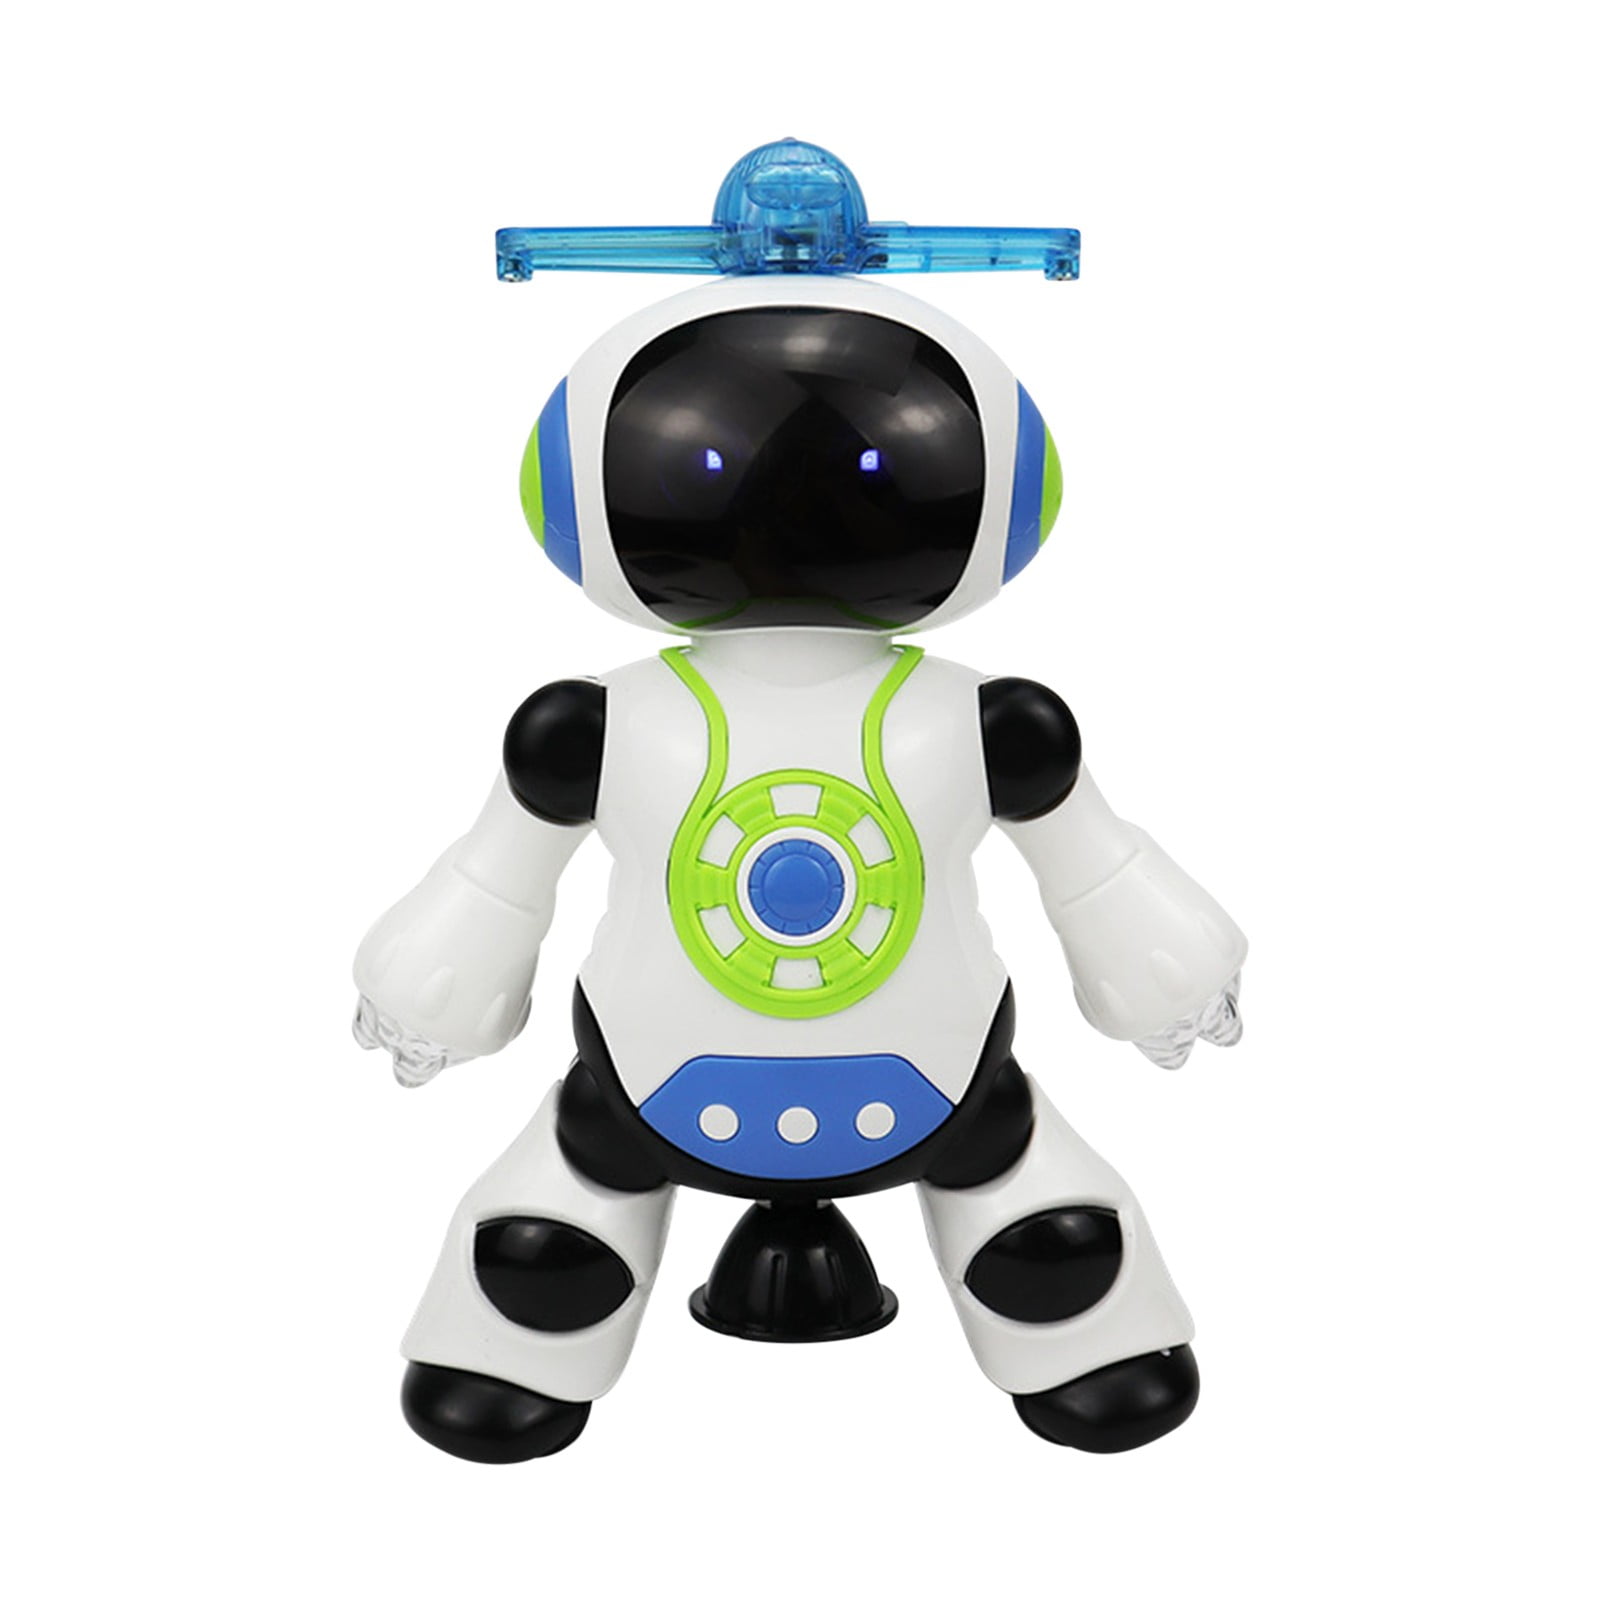 Remote Control Robot,Robot Toy,Robot For Kids,Children's Universal Light Music Projection Dancing Rotating Top Ball Electric Toy A Walmart.com